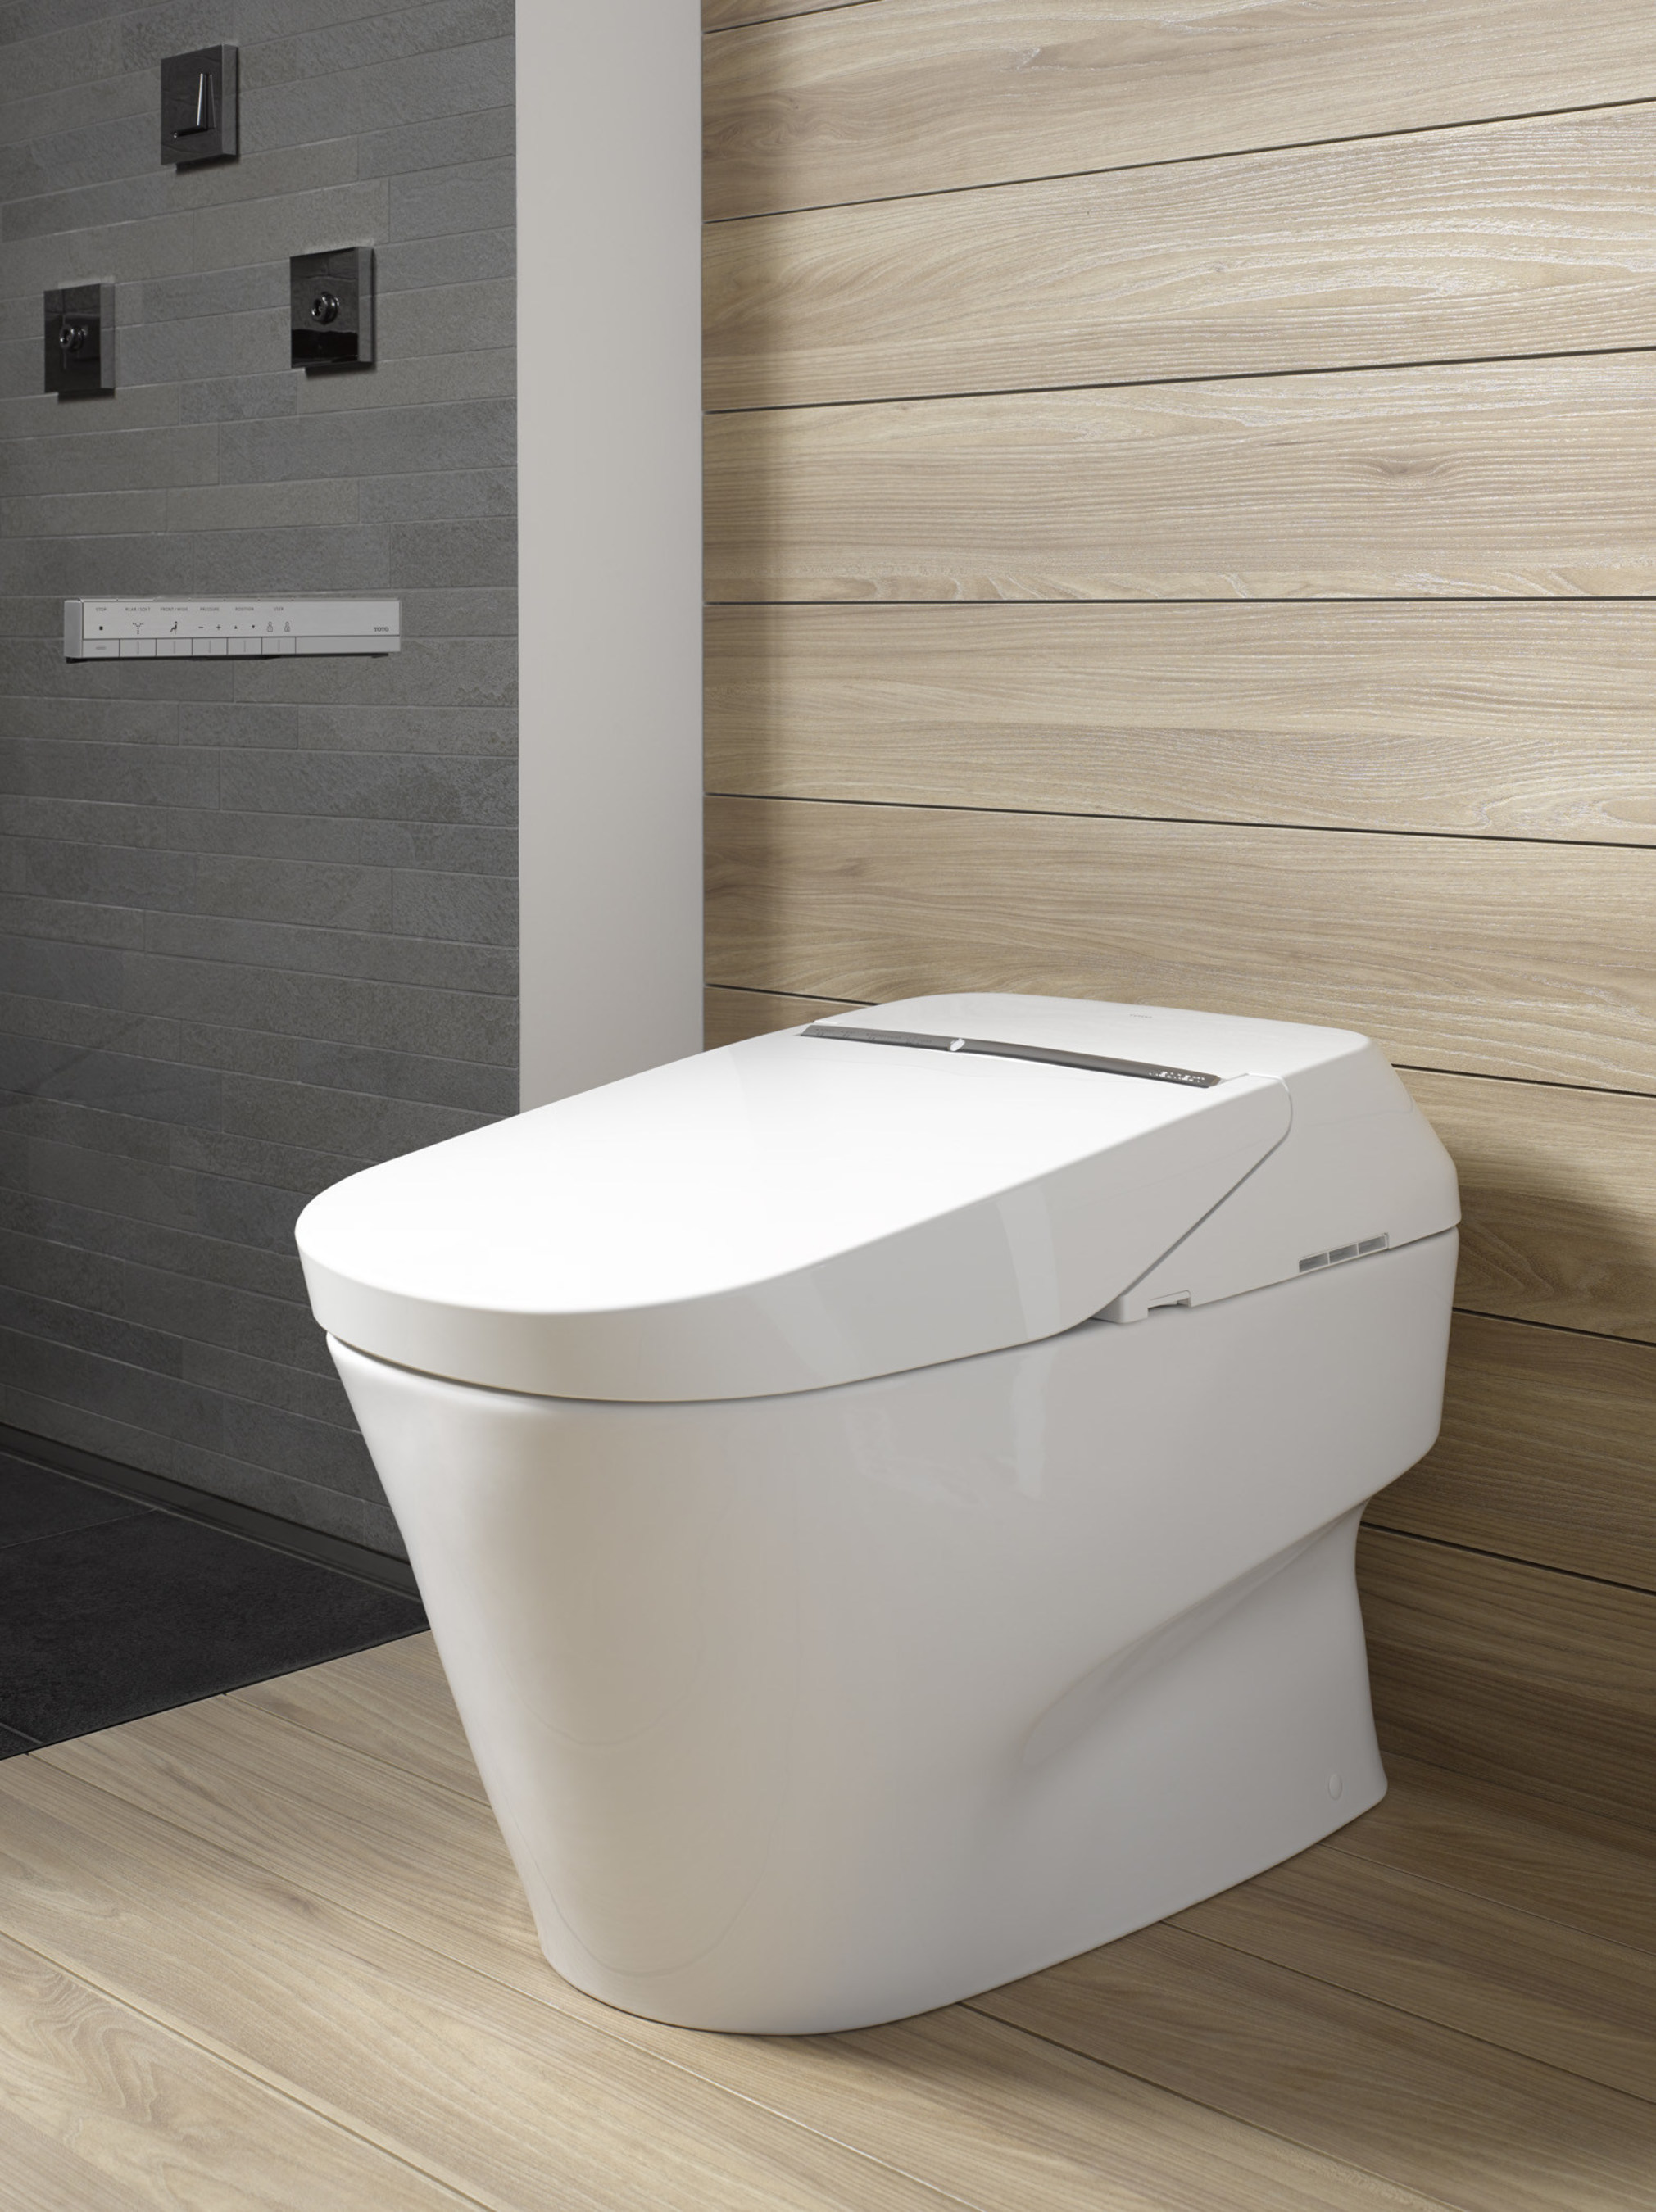 Toto Showcases The Neorest 750h Intelligent Toilet At The 2016